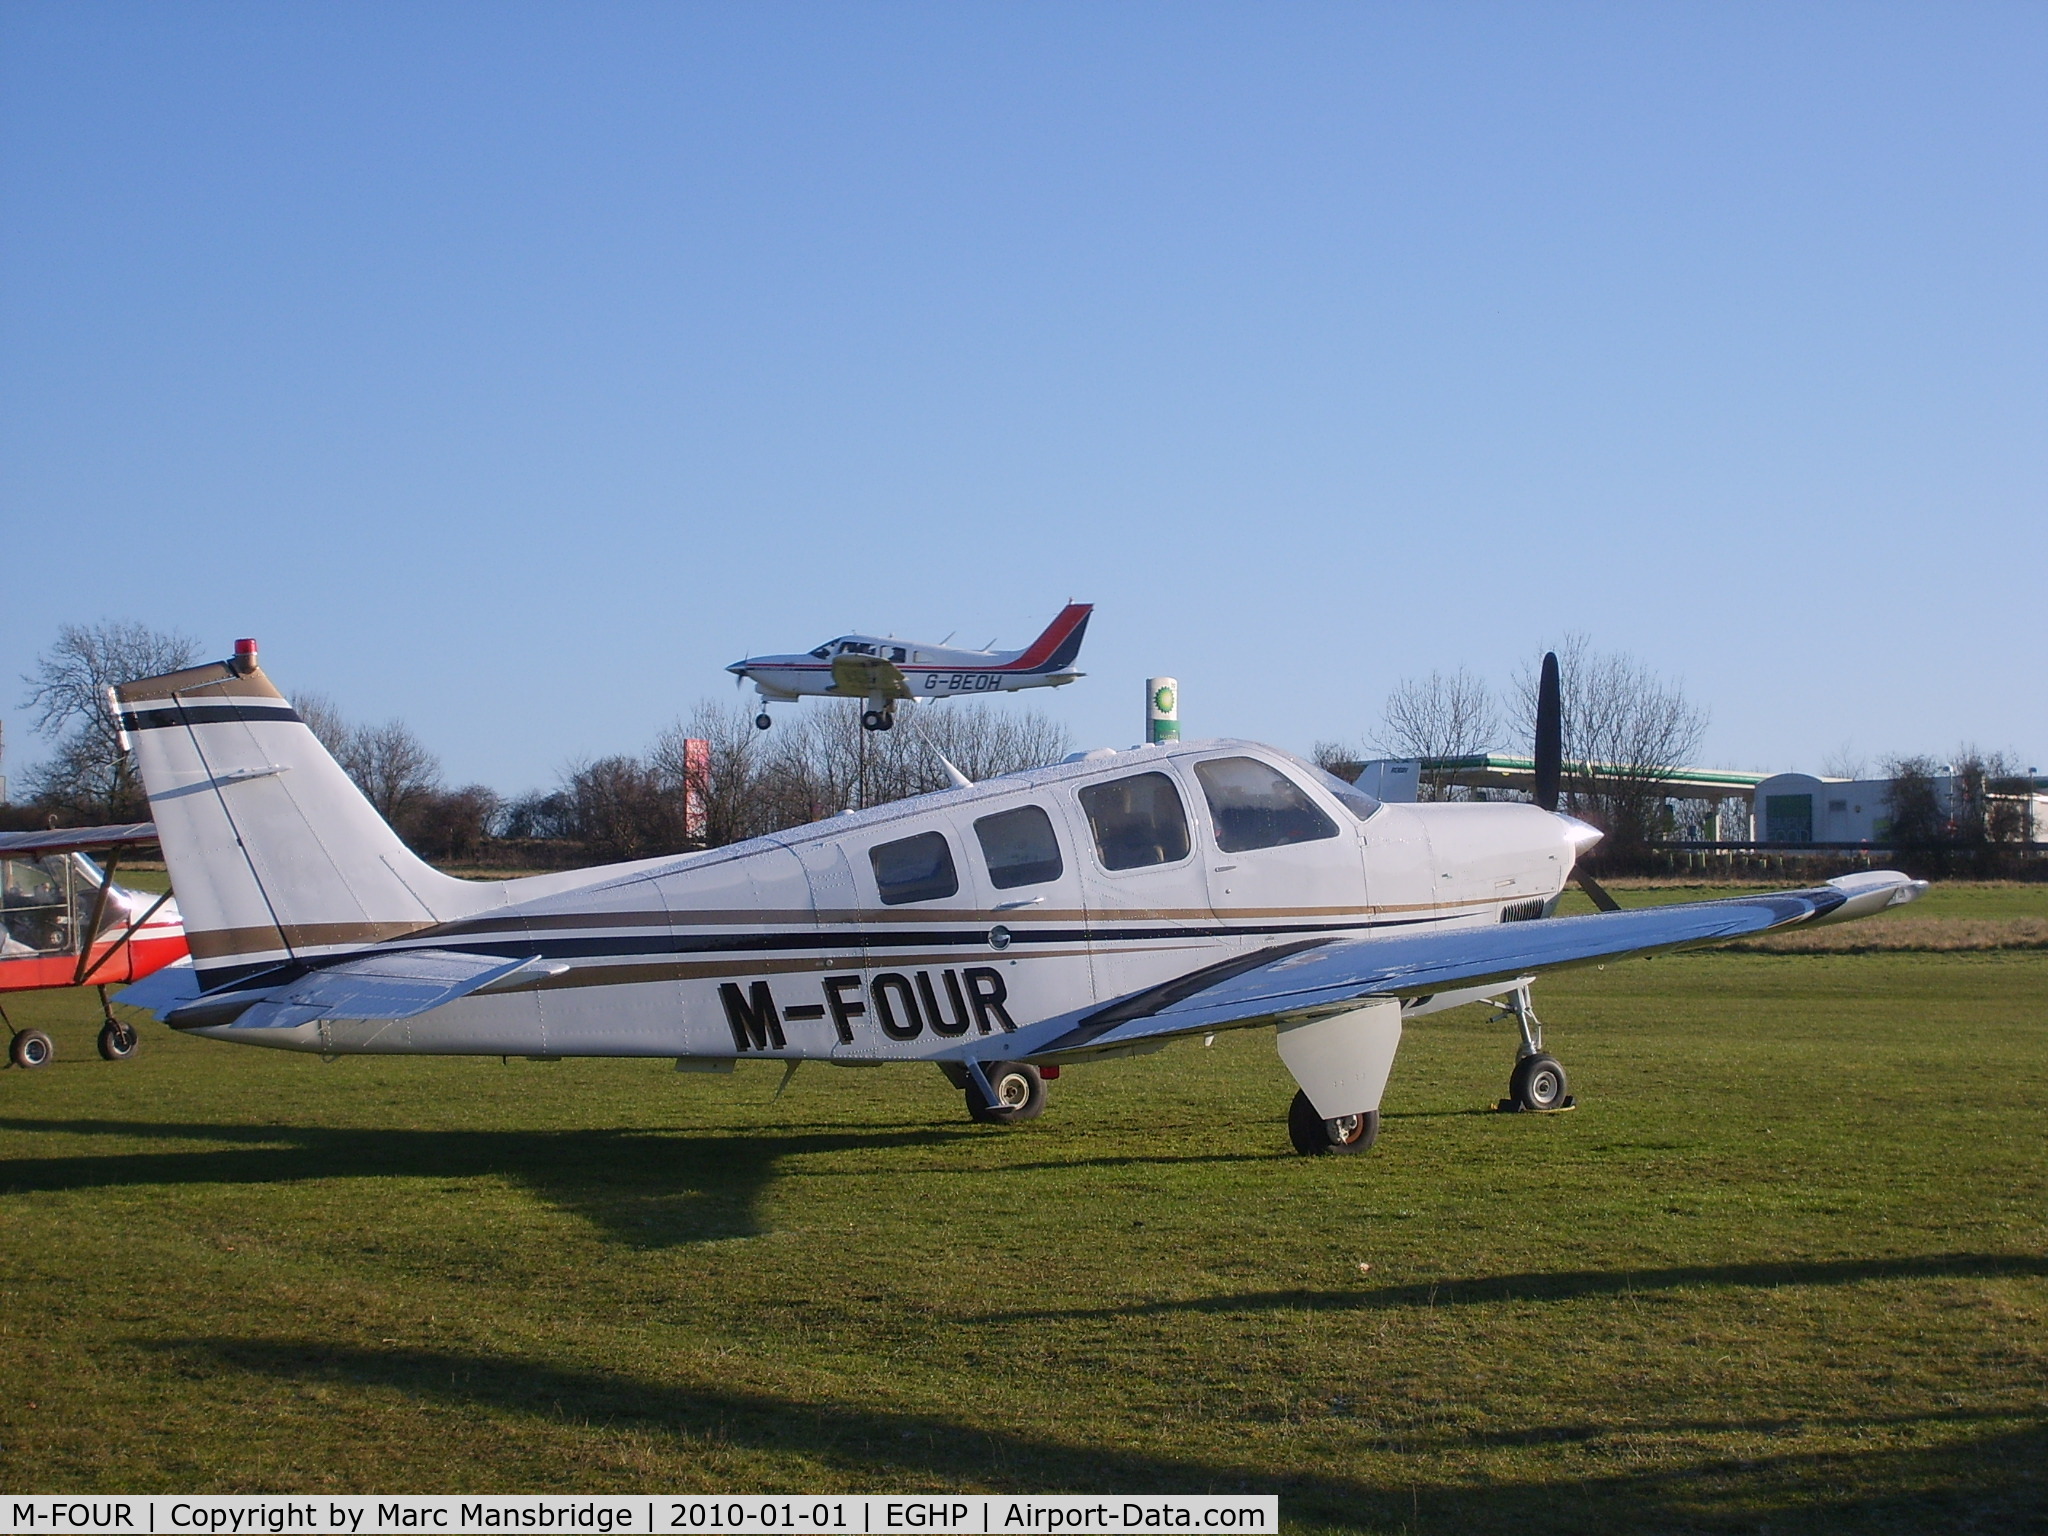 M-FOUR, 2008 Hawker Beechcraft G36 Bonanza C/N E-3849, Parked at Popham airfield EGHP with G-BEOH landing over the top